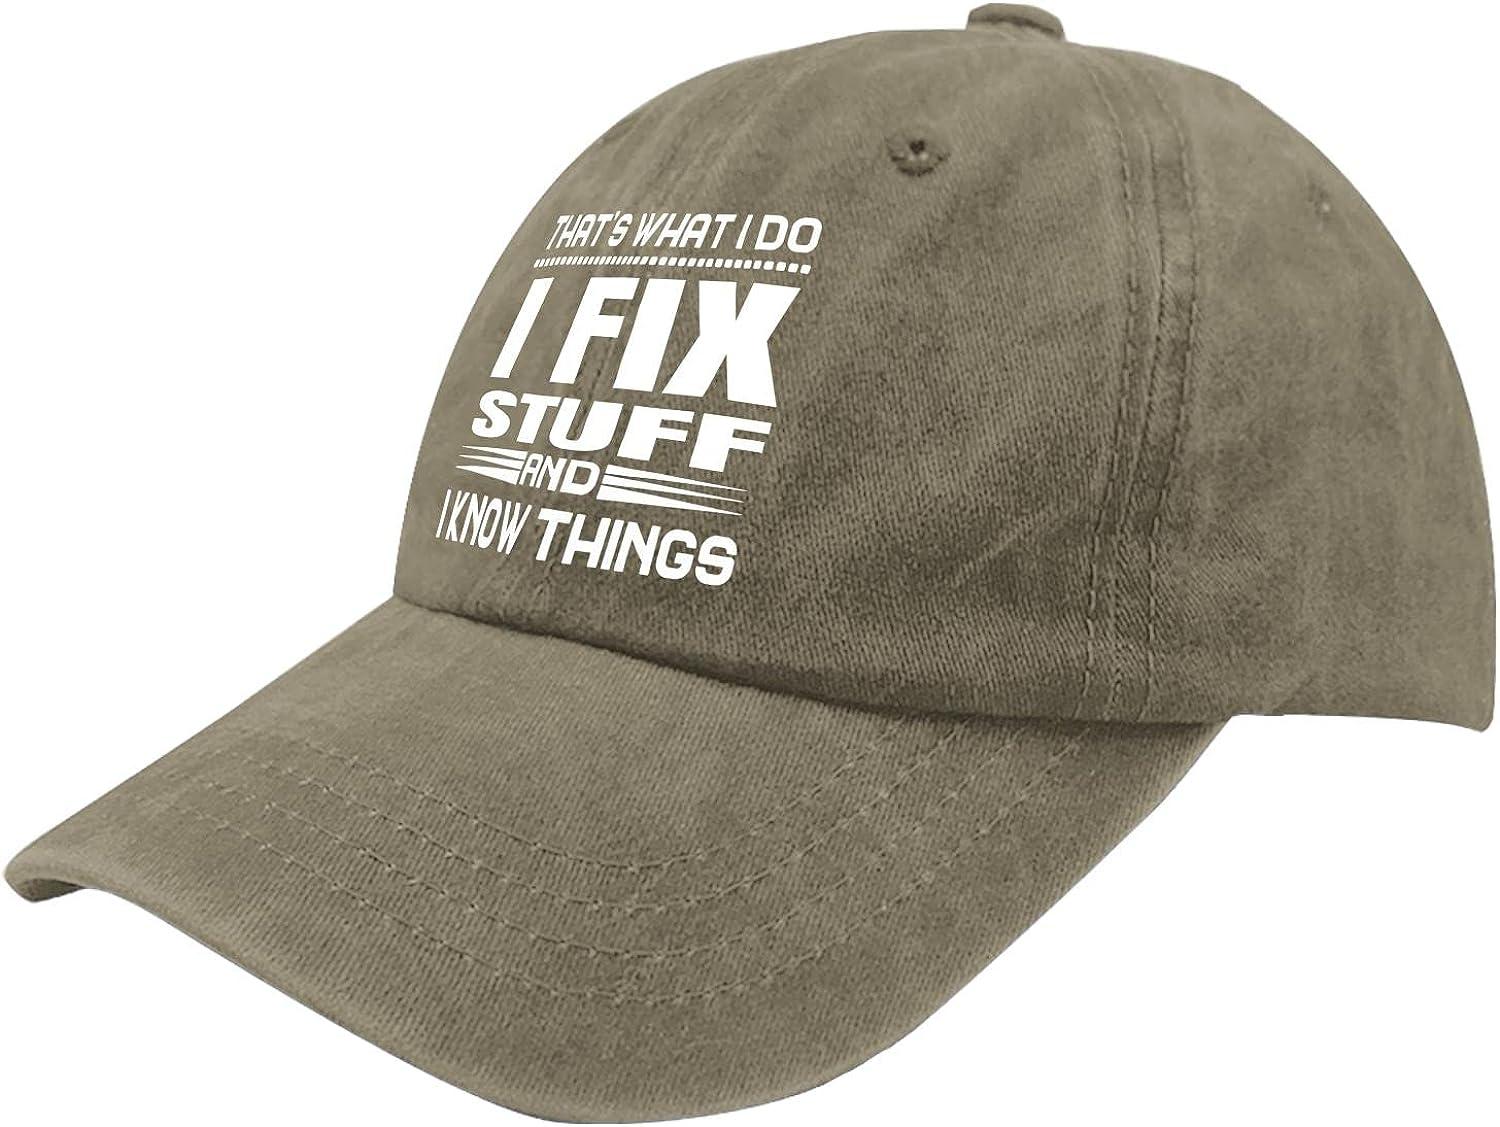 That's Whats I Do I Fix Stuff and I Know Things Baseball Caps for Men  Washed Denim Adjustable Strapback Cap Hat Pigment Khaki One Size